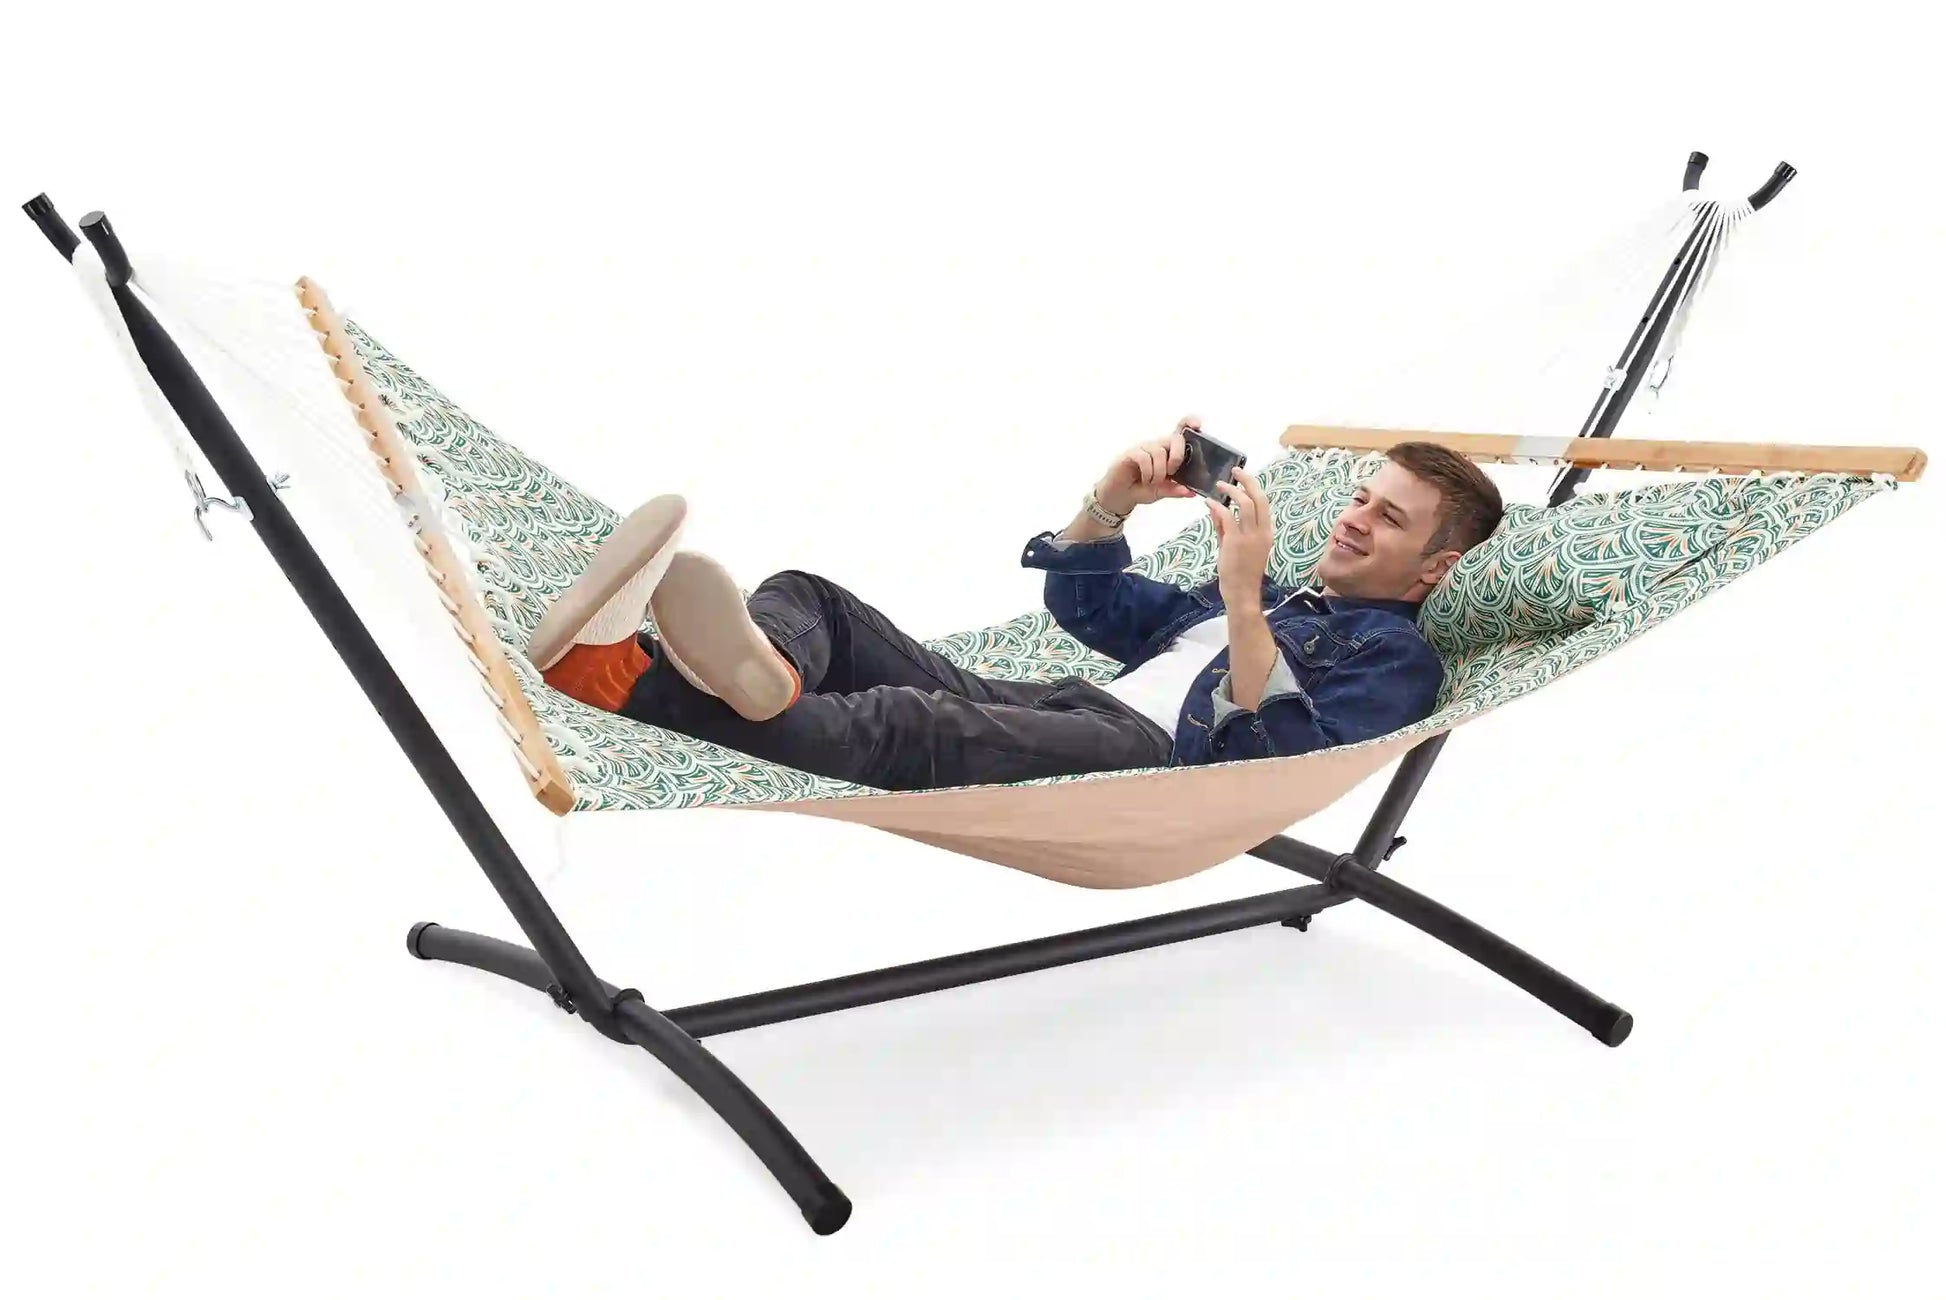 9 FT Space-Saving Hammock with Stand - Fan-shaped Golden Leaf